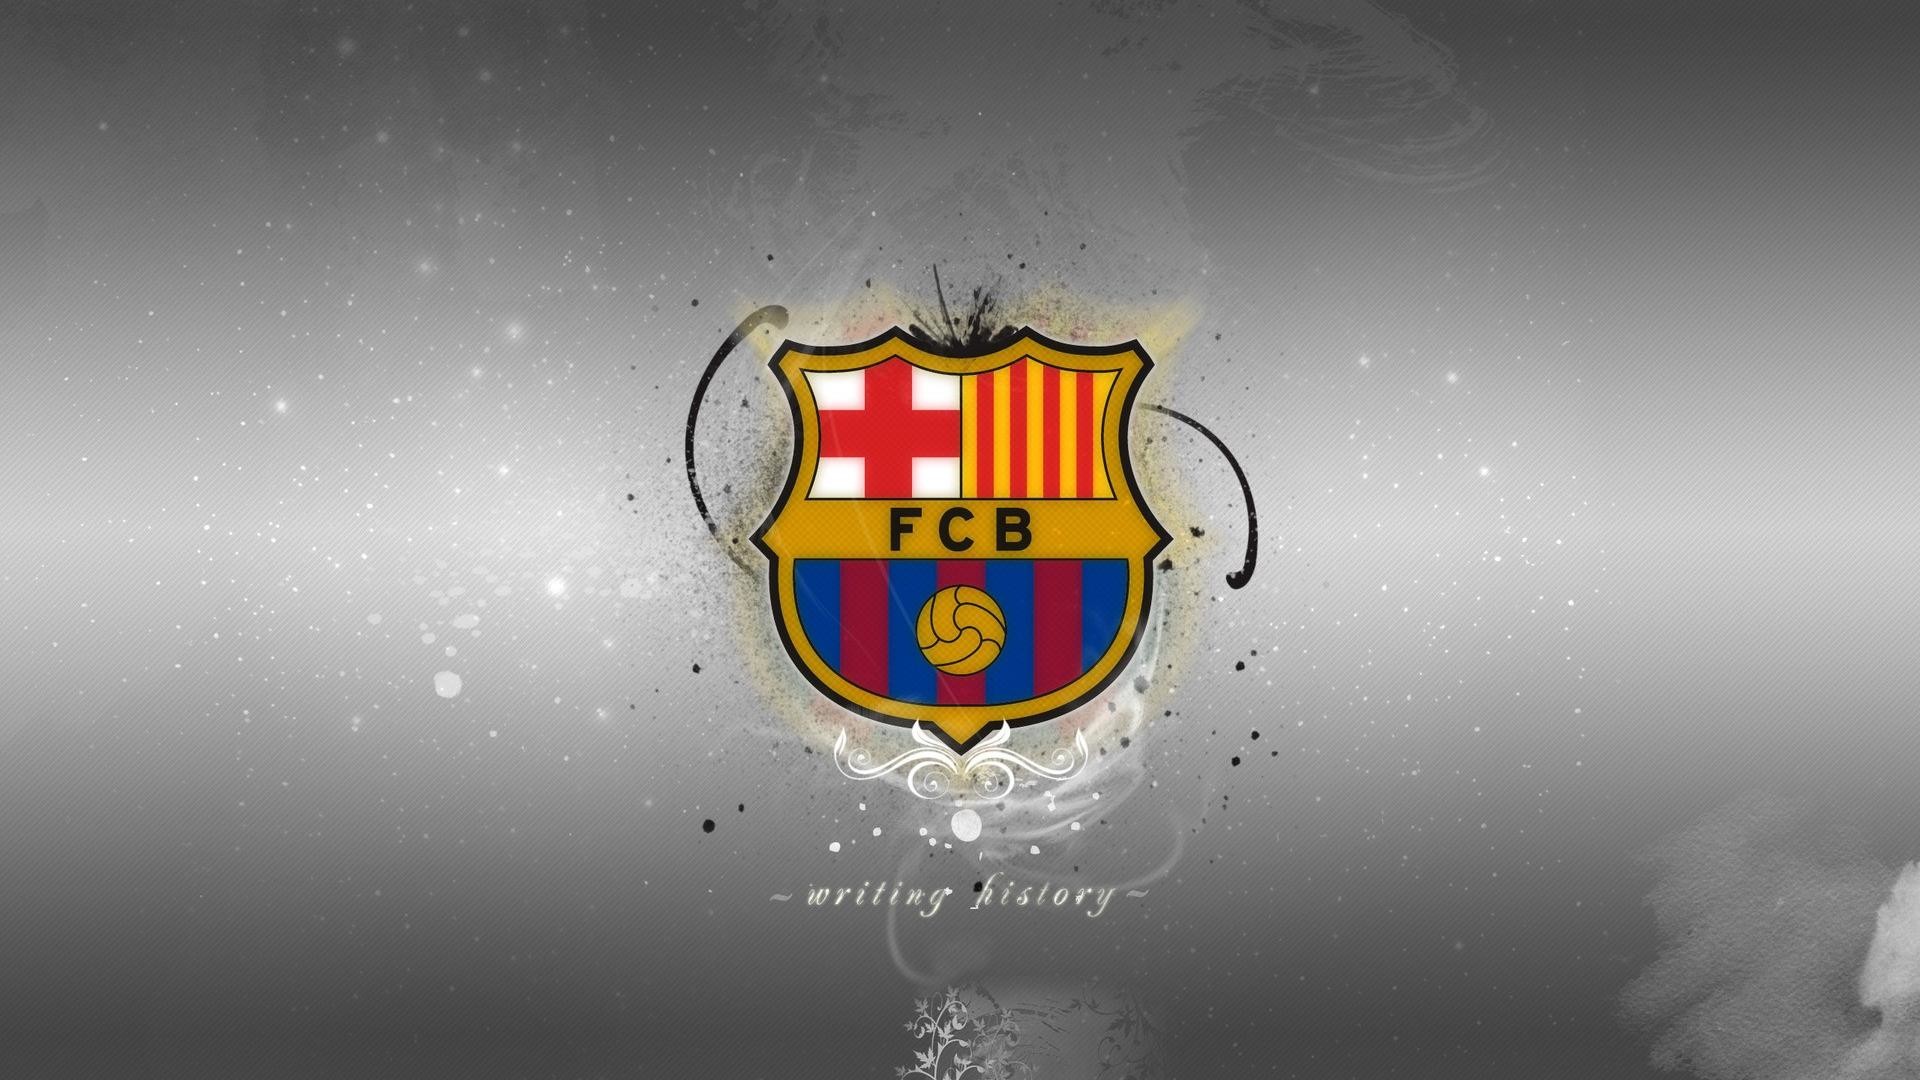 Fcb HD Wallpapers 2018 (85+ images)1920 x 1080